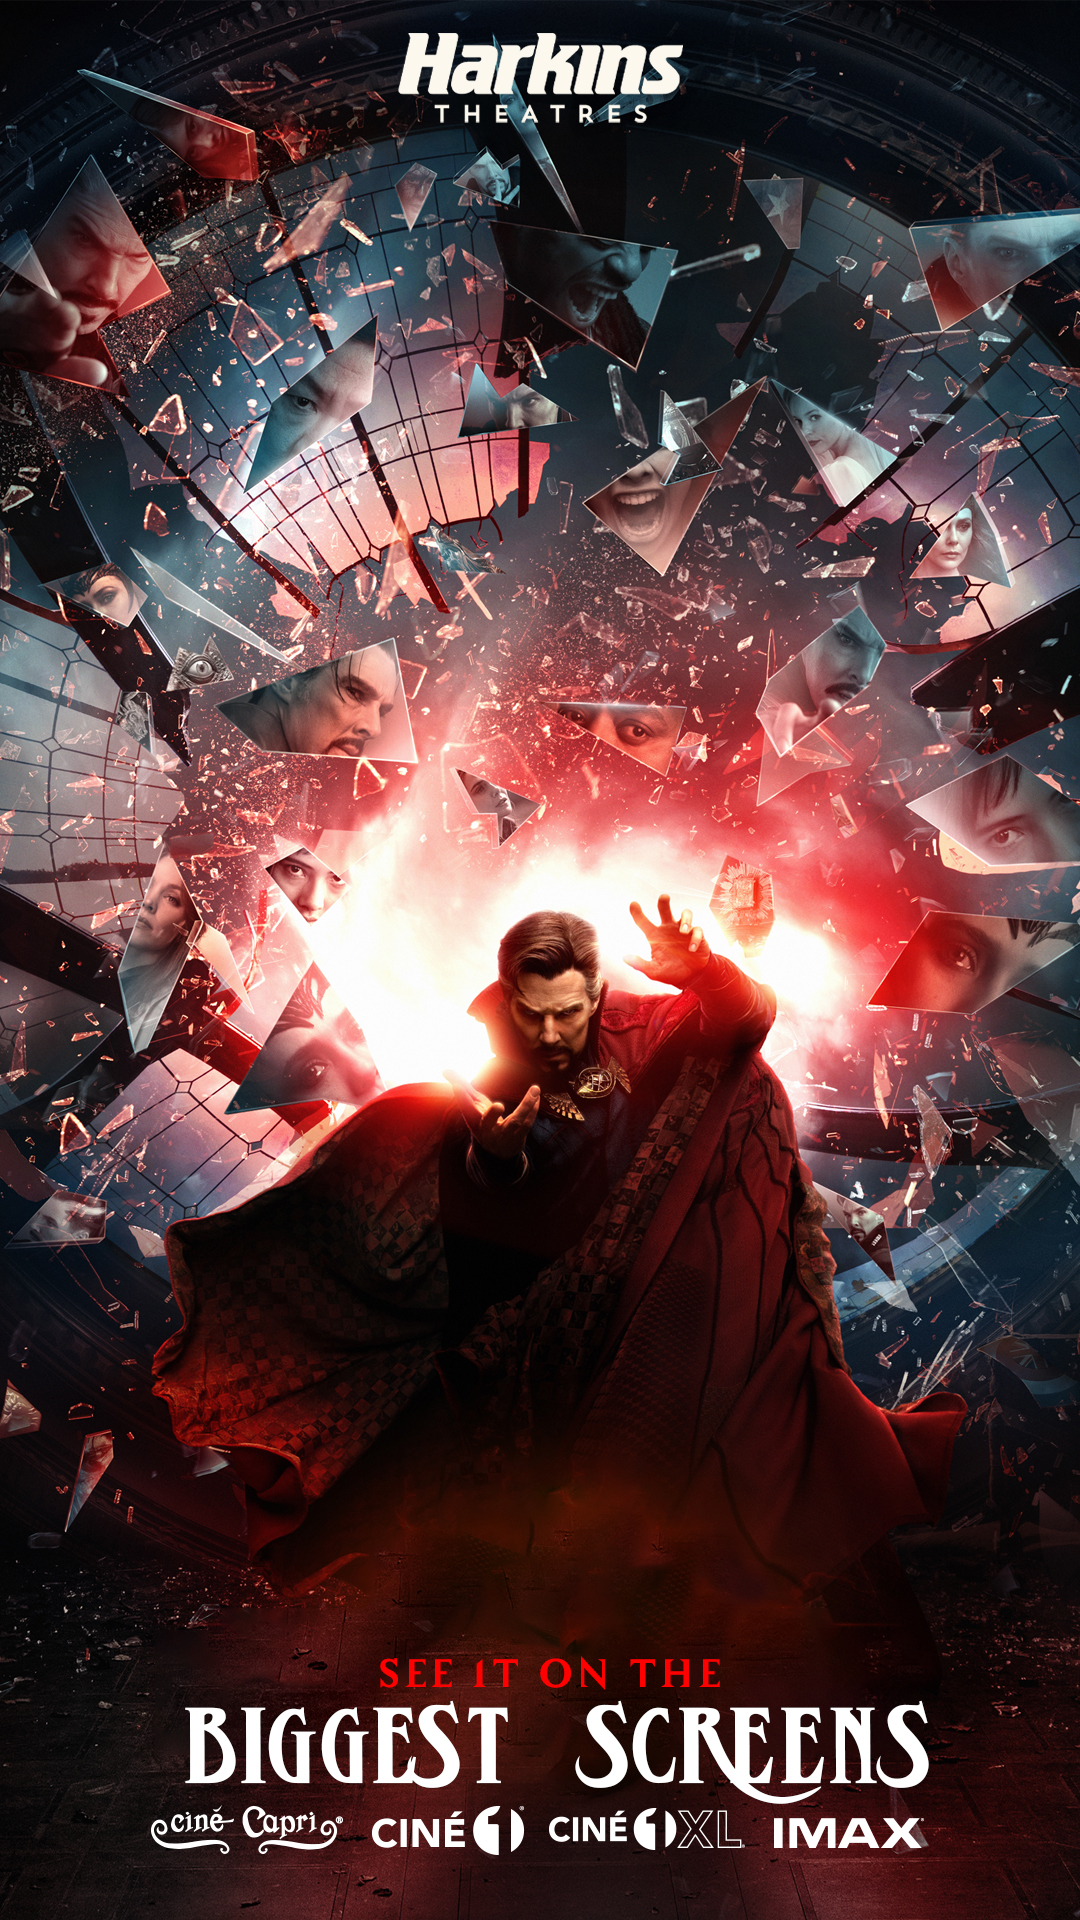 SEE IT ON THE BIGGEST SCREENS 
DOCTOR STRANGE IN A POSE WITH BROKEN GLASS BEHIND HIM